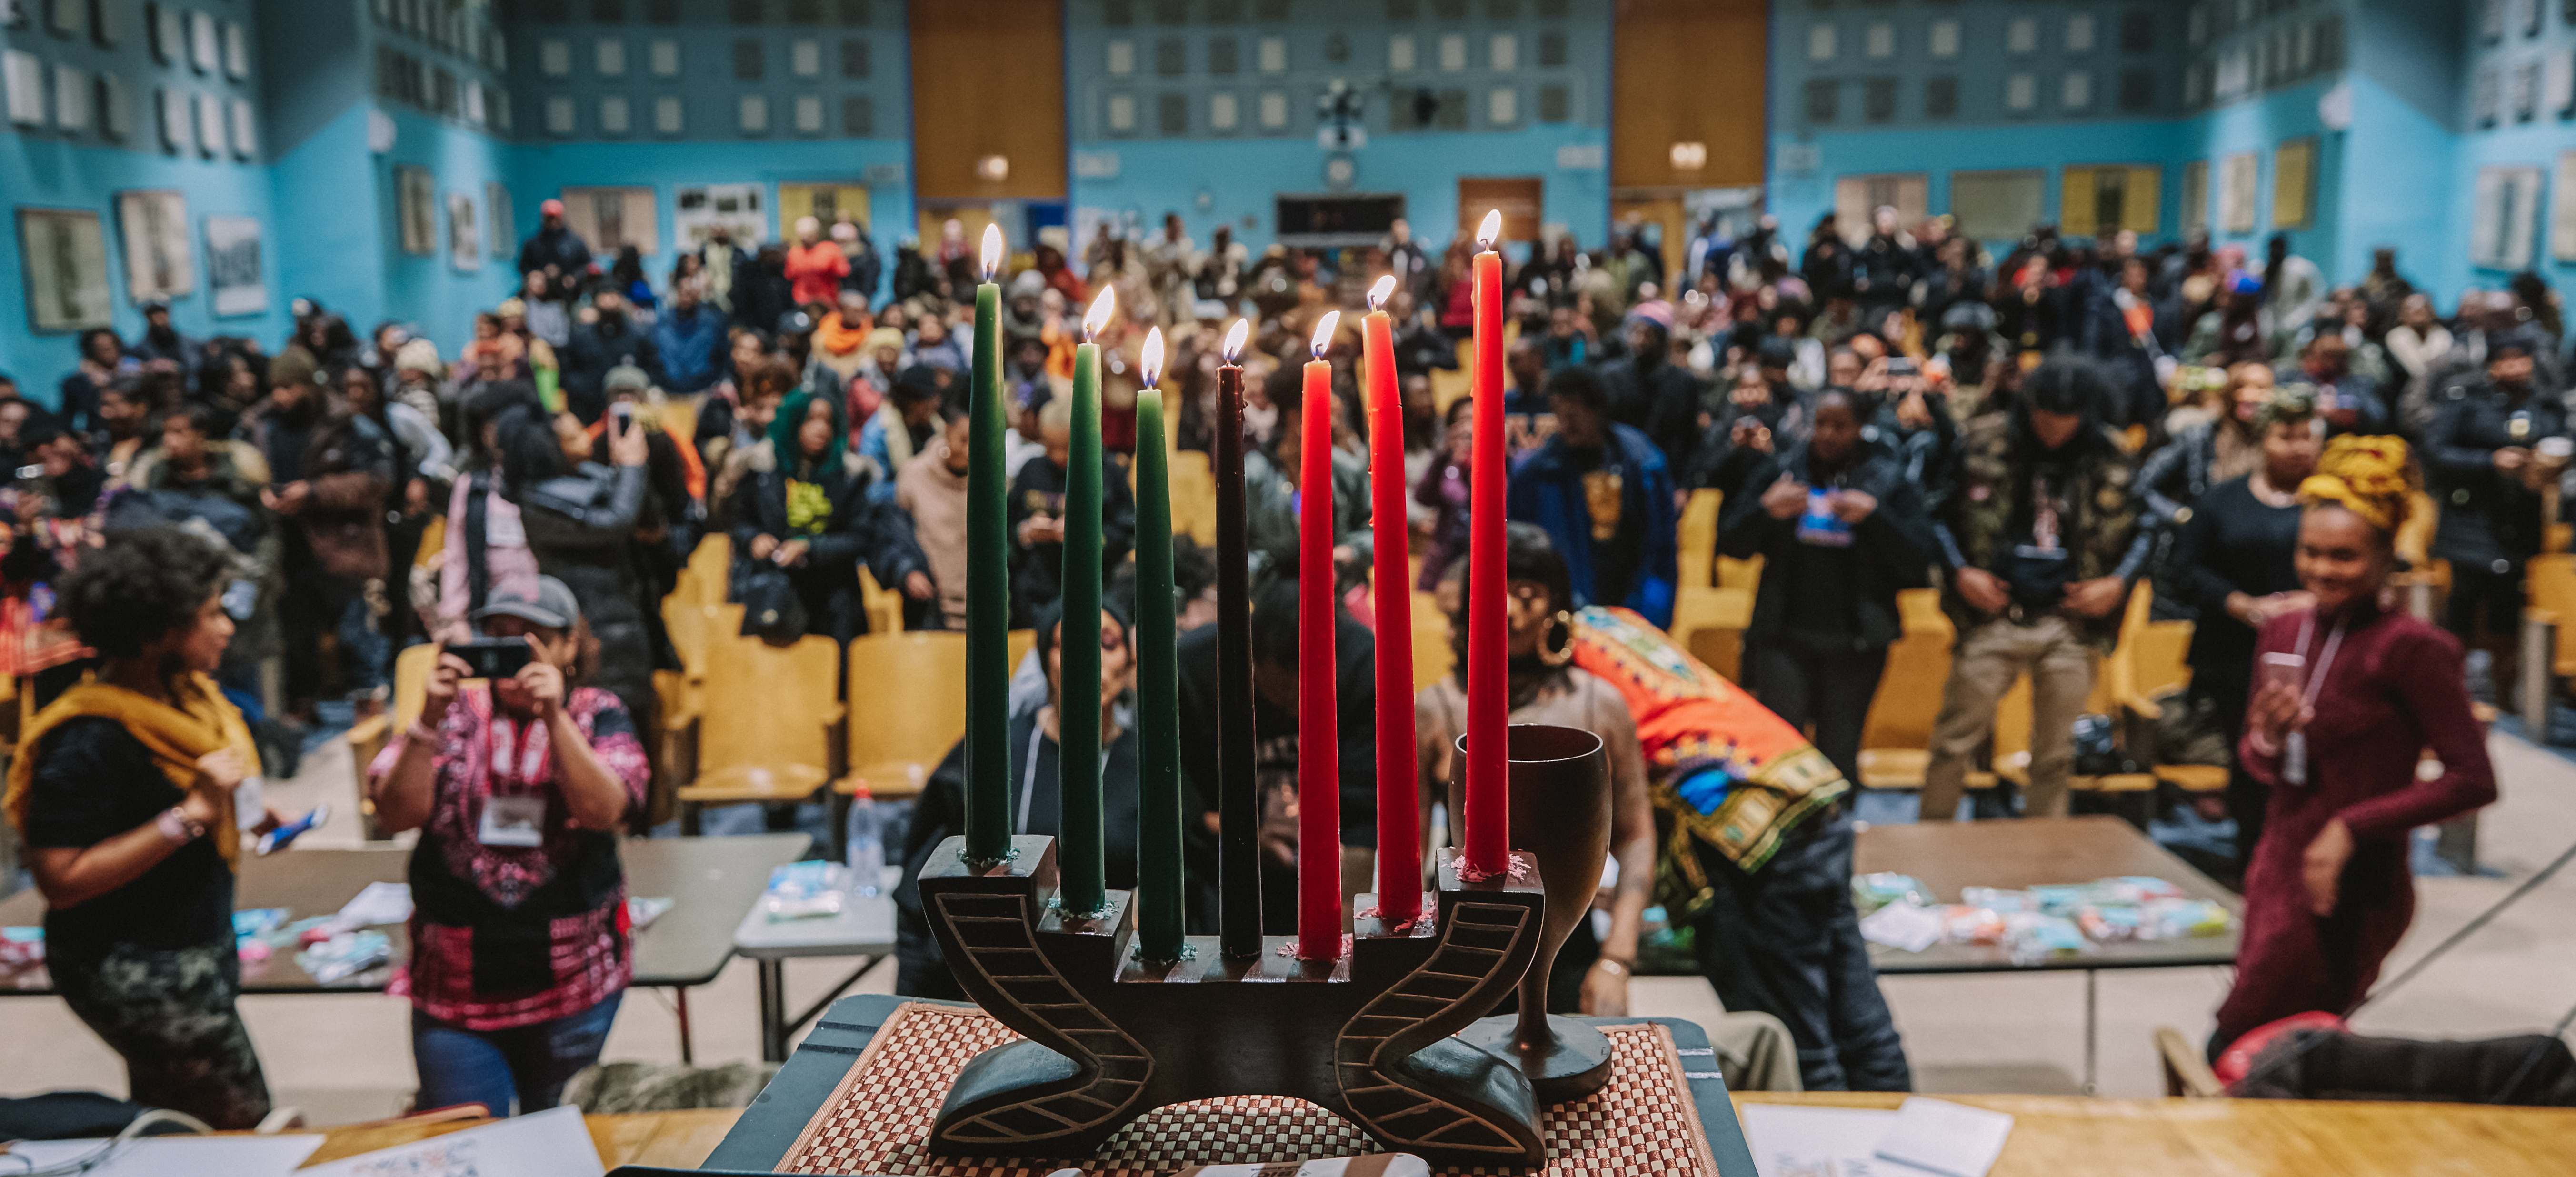 Kwanzaa Principles Can Make A Difference For Black Women